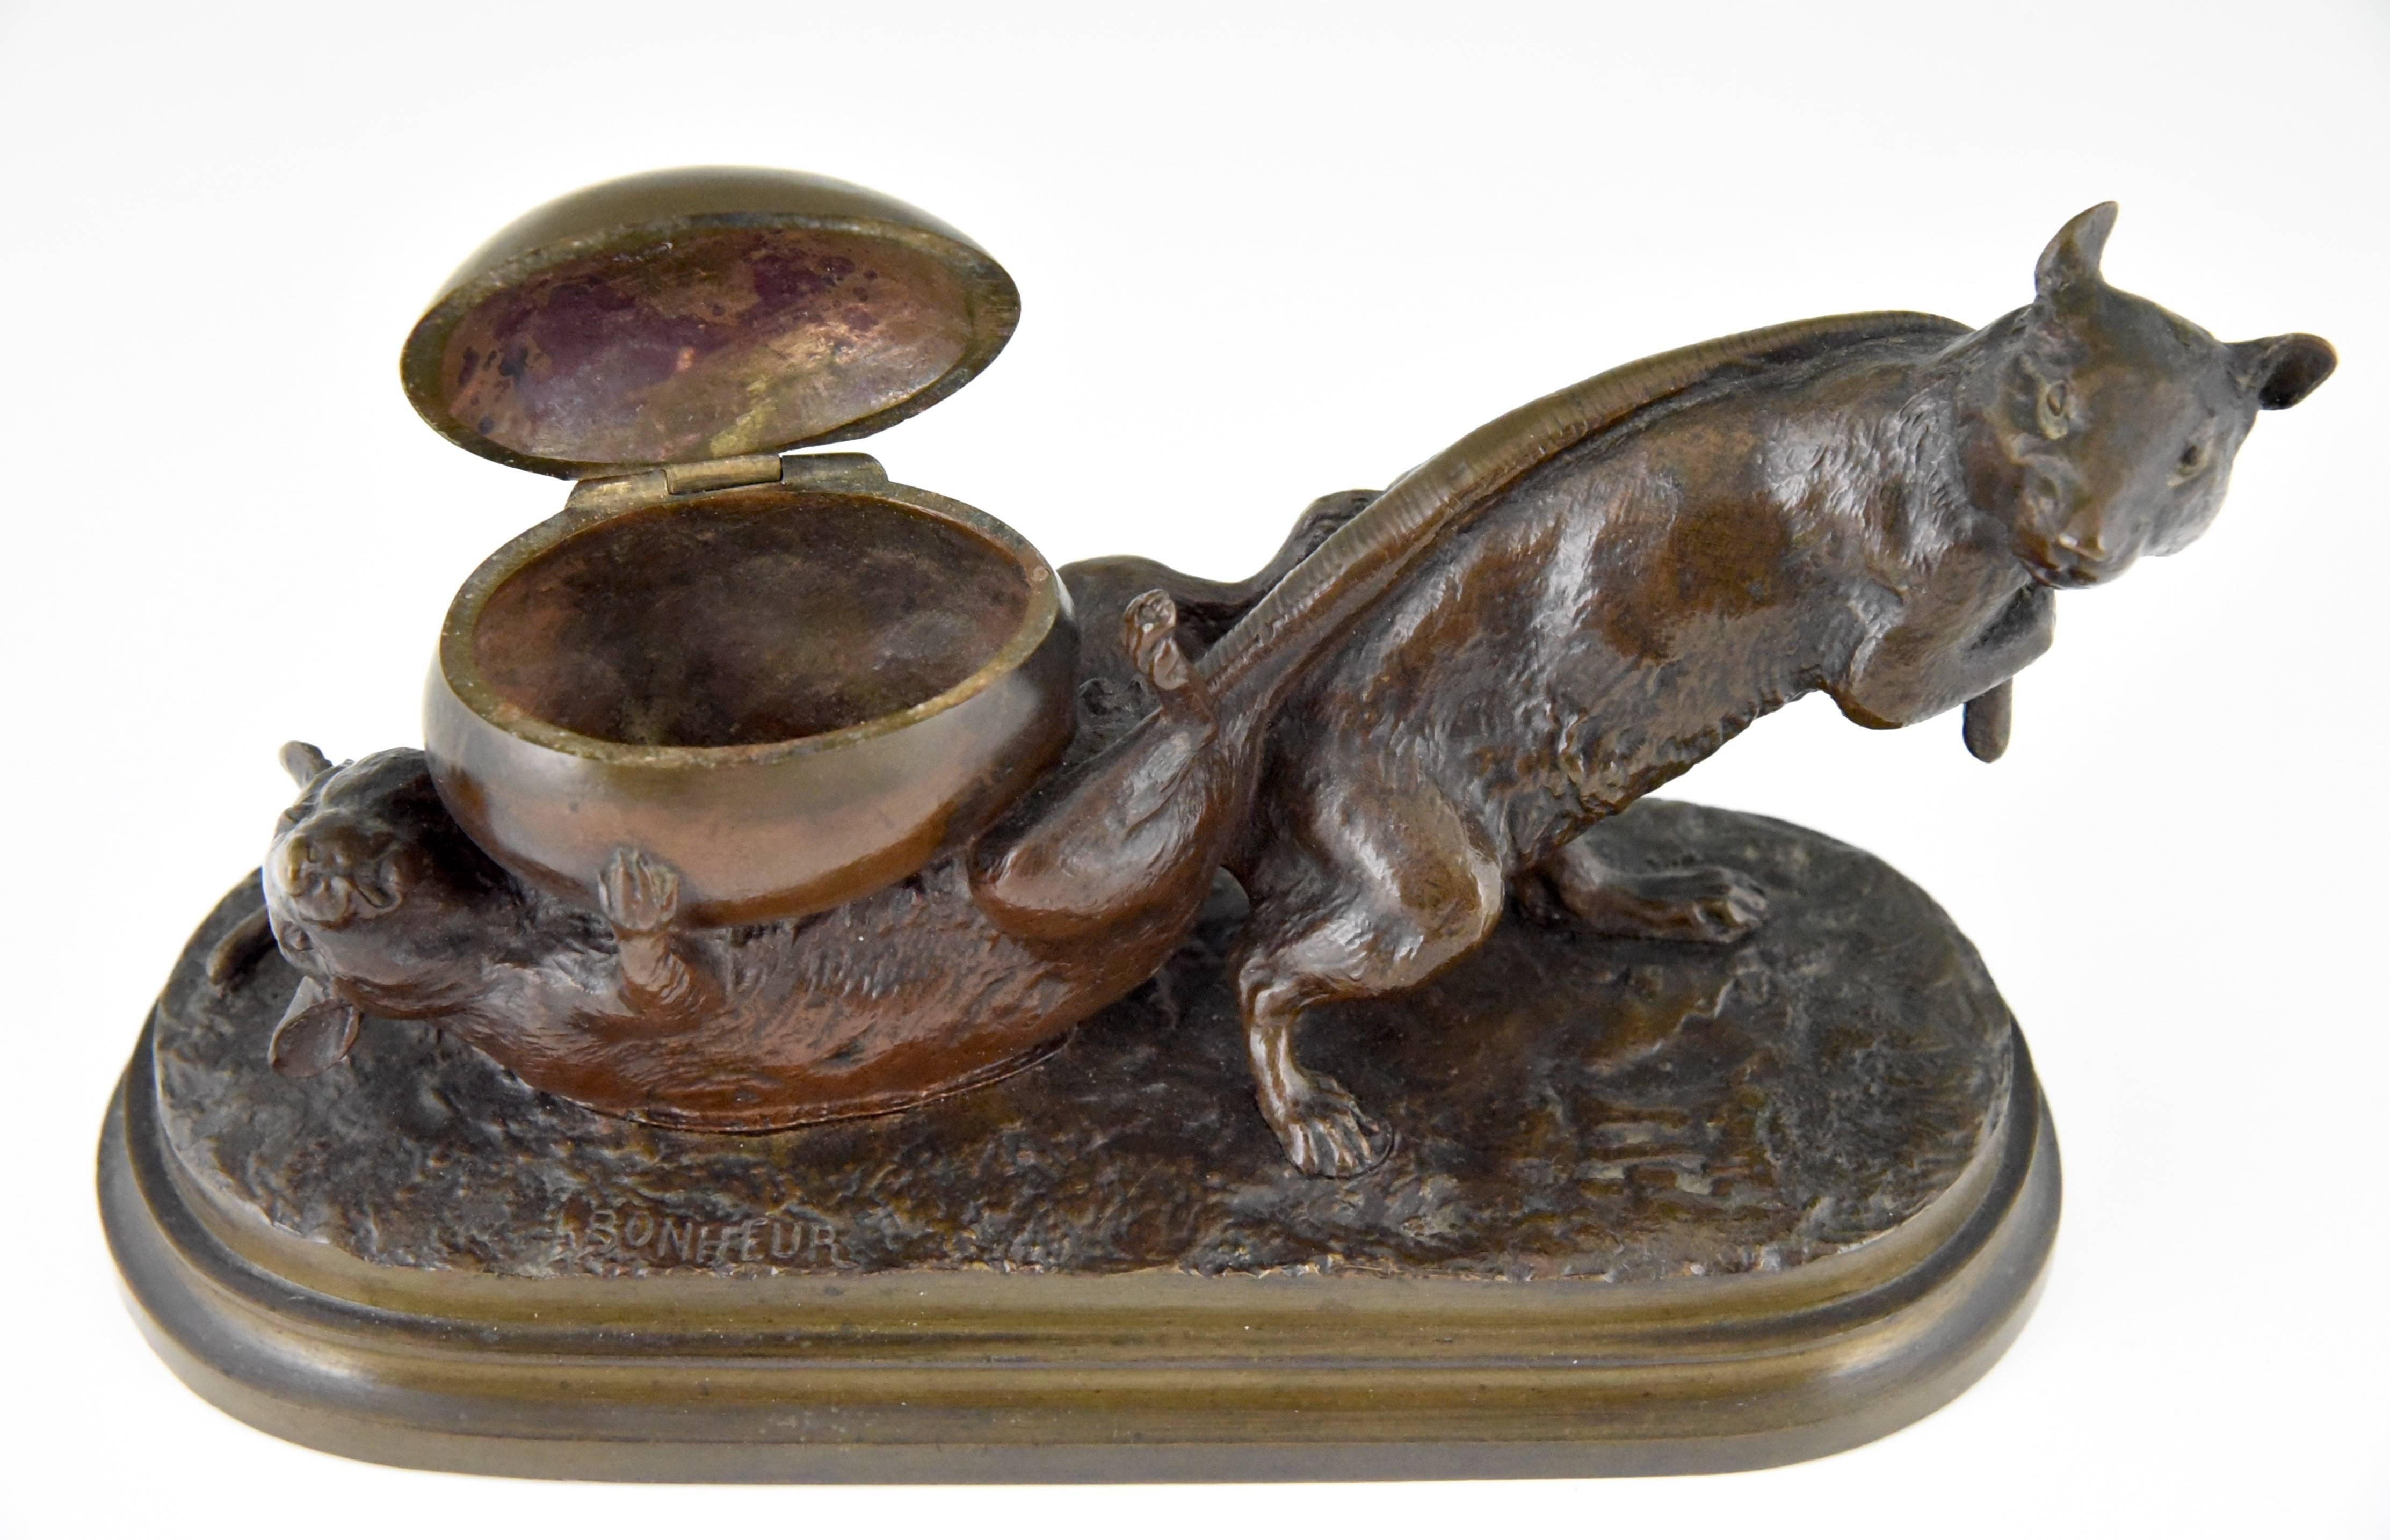 Antique bronze sculpture of two mice and an egg by Isidore Bonheur. After the fable by Jean de La Fontaine. 
The egg can be opened.